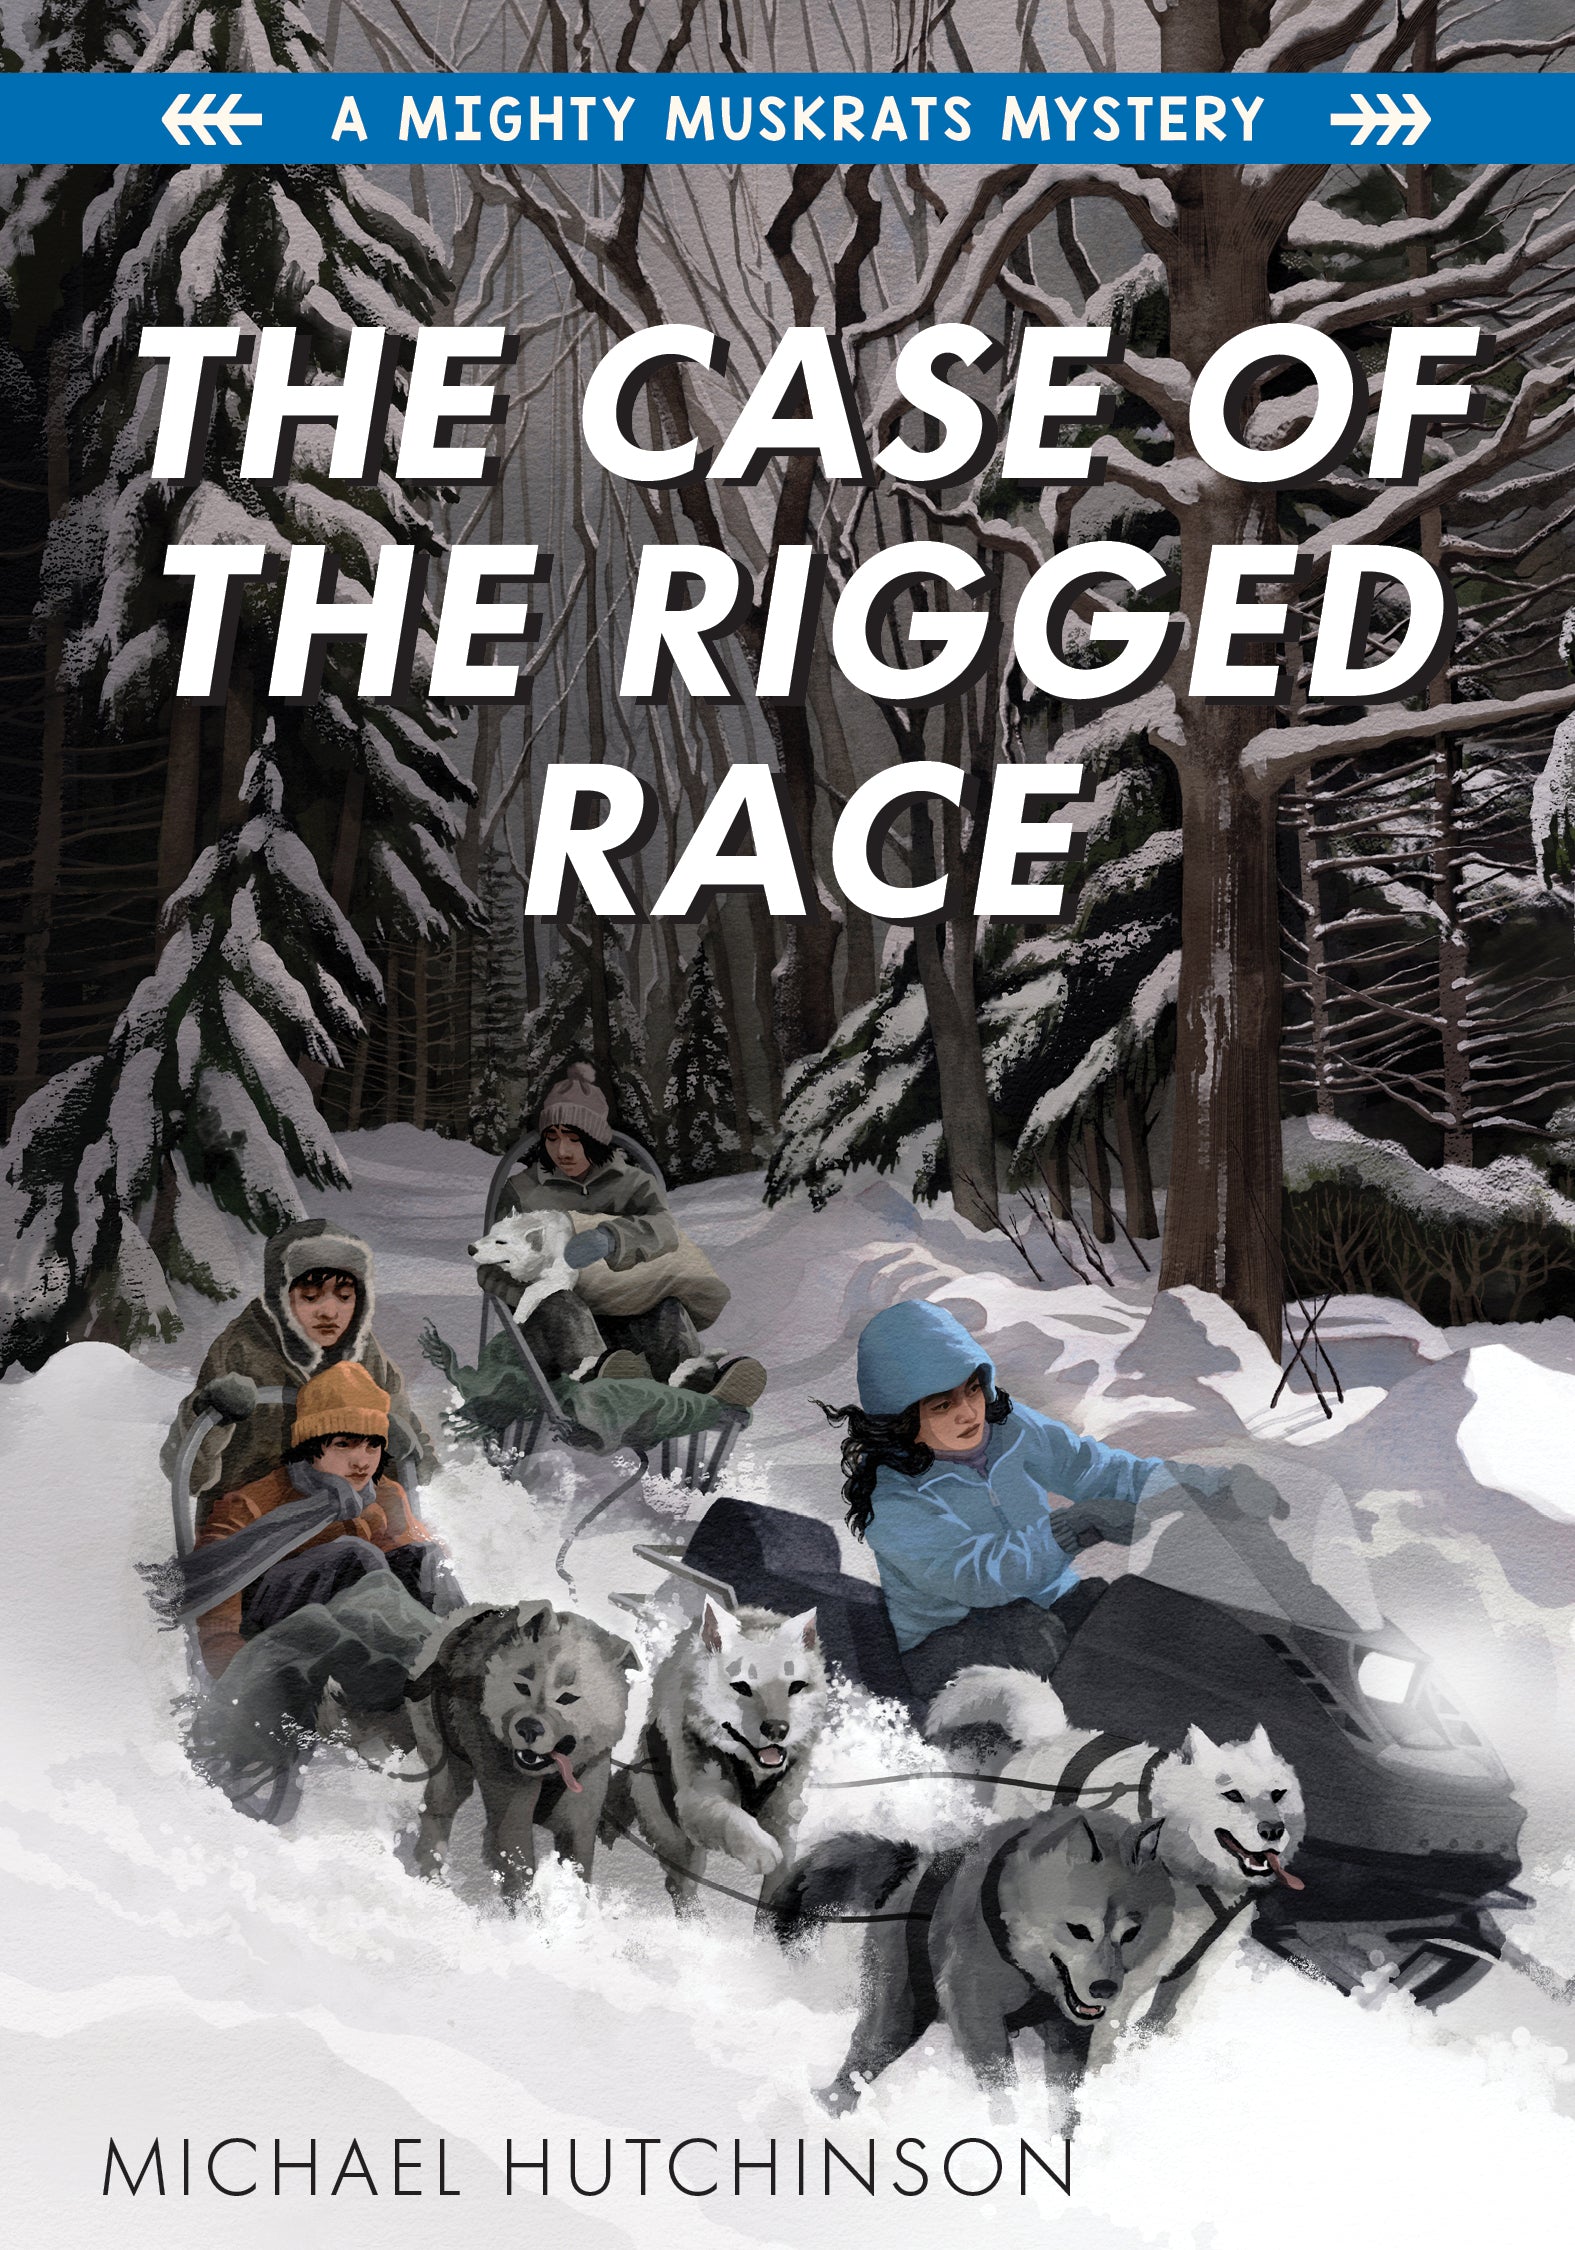 The Case of the Rigged Race-ebook